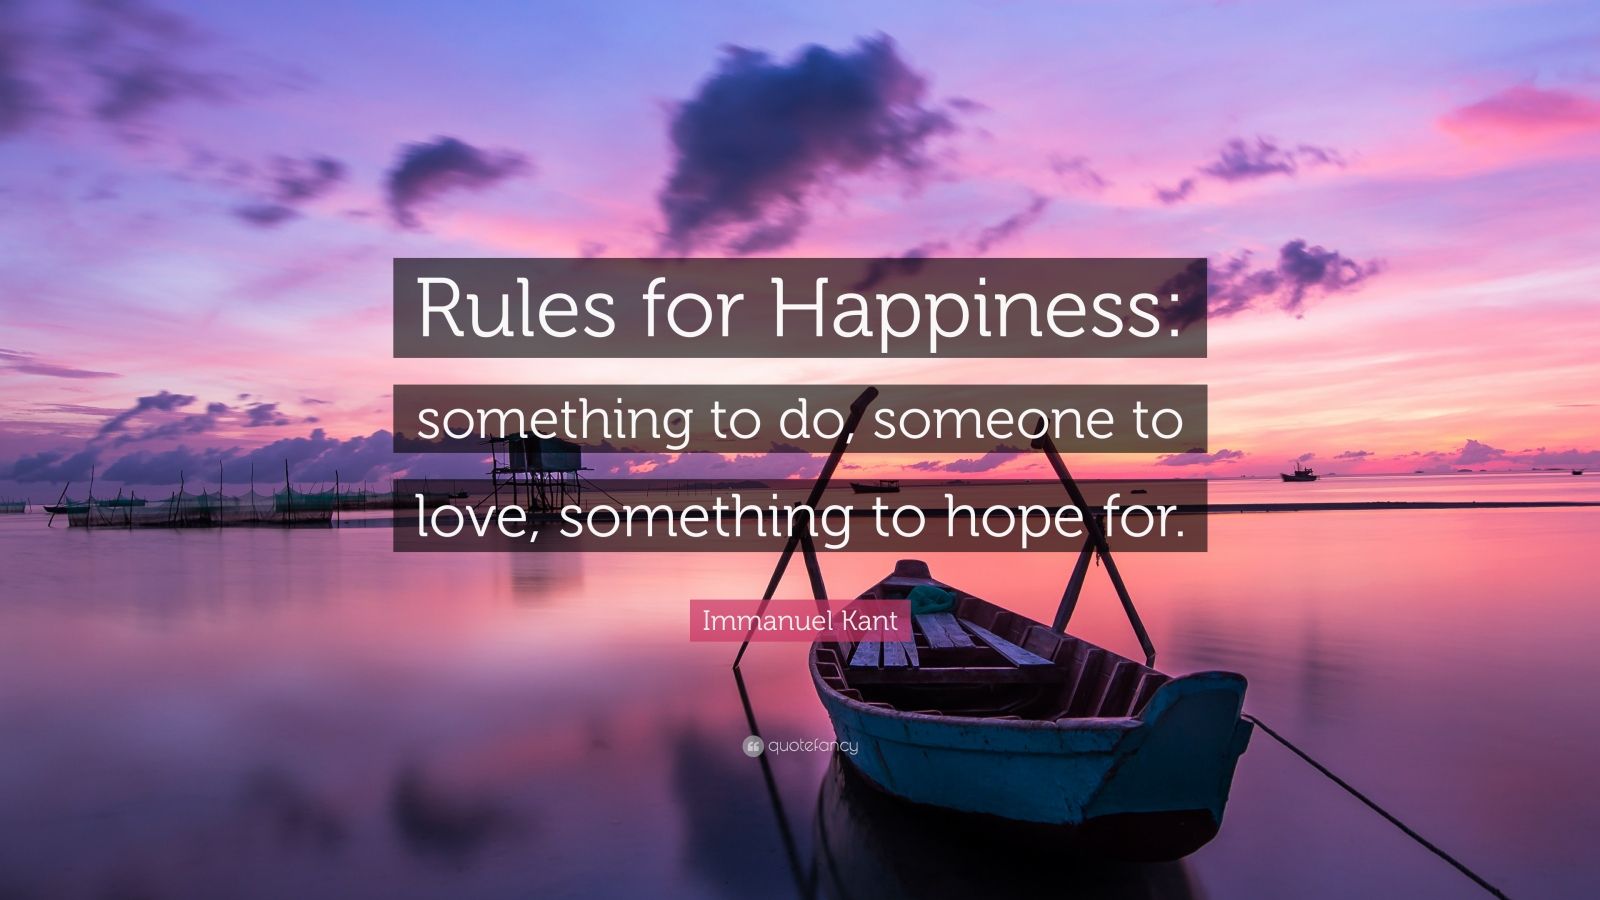 Immanuel Kant Quote: "Rules for Happiness: something to do, someone to love, something to hope ...